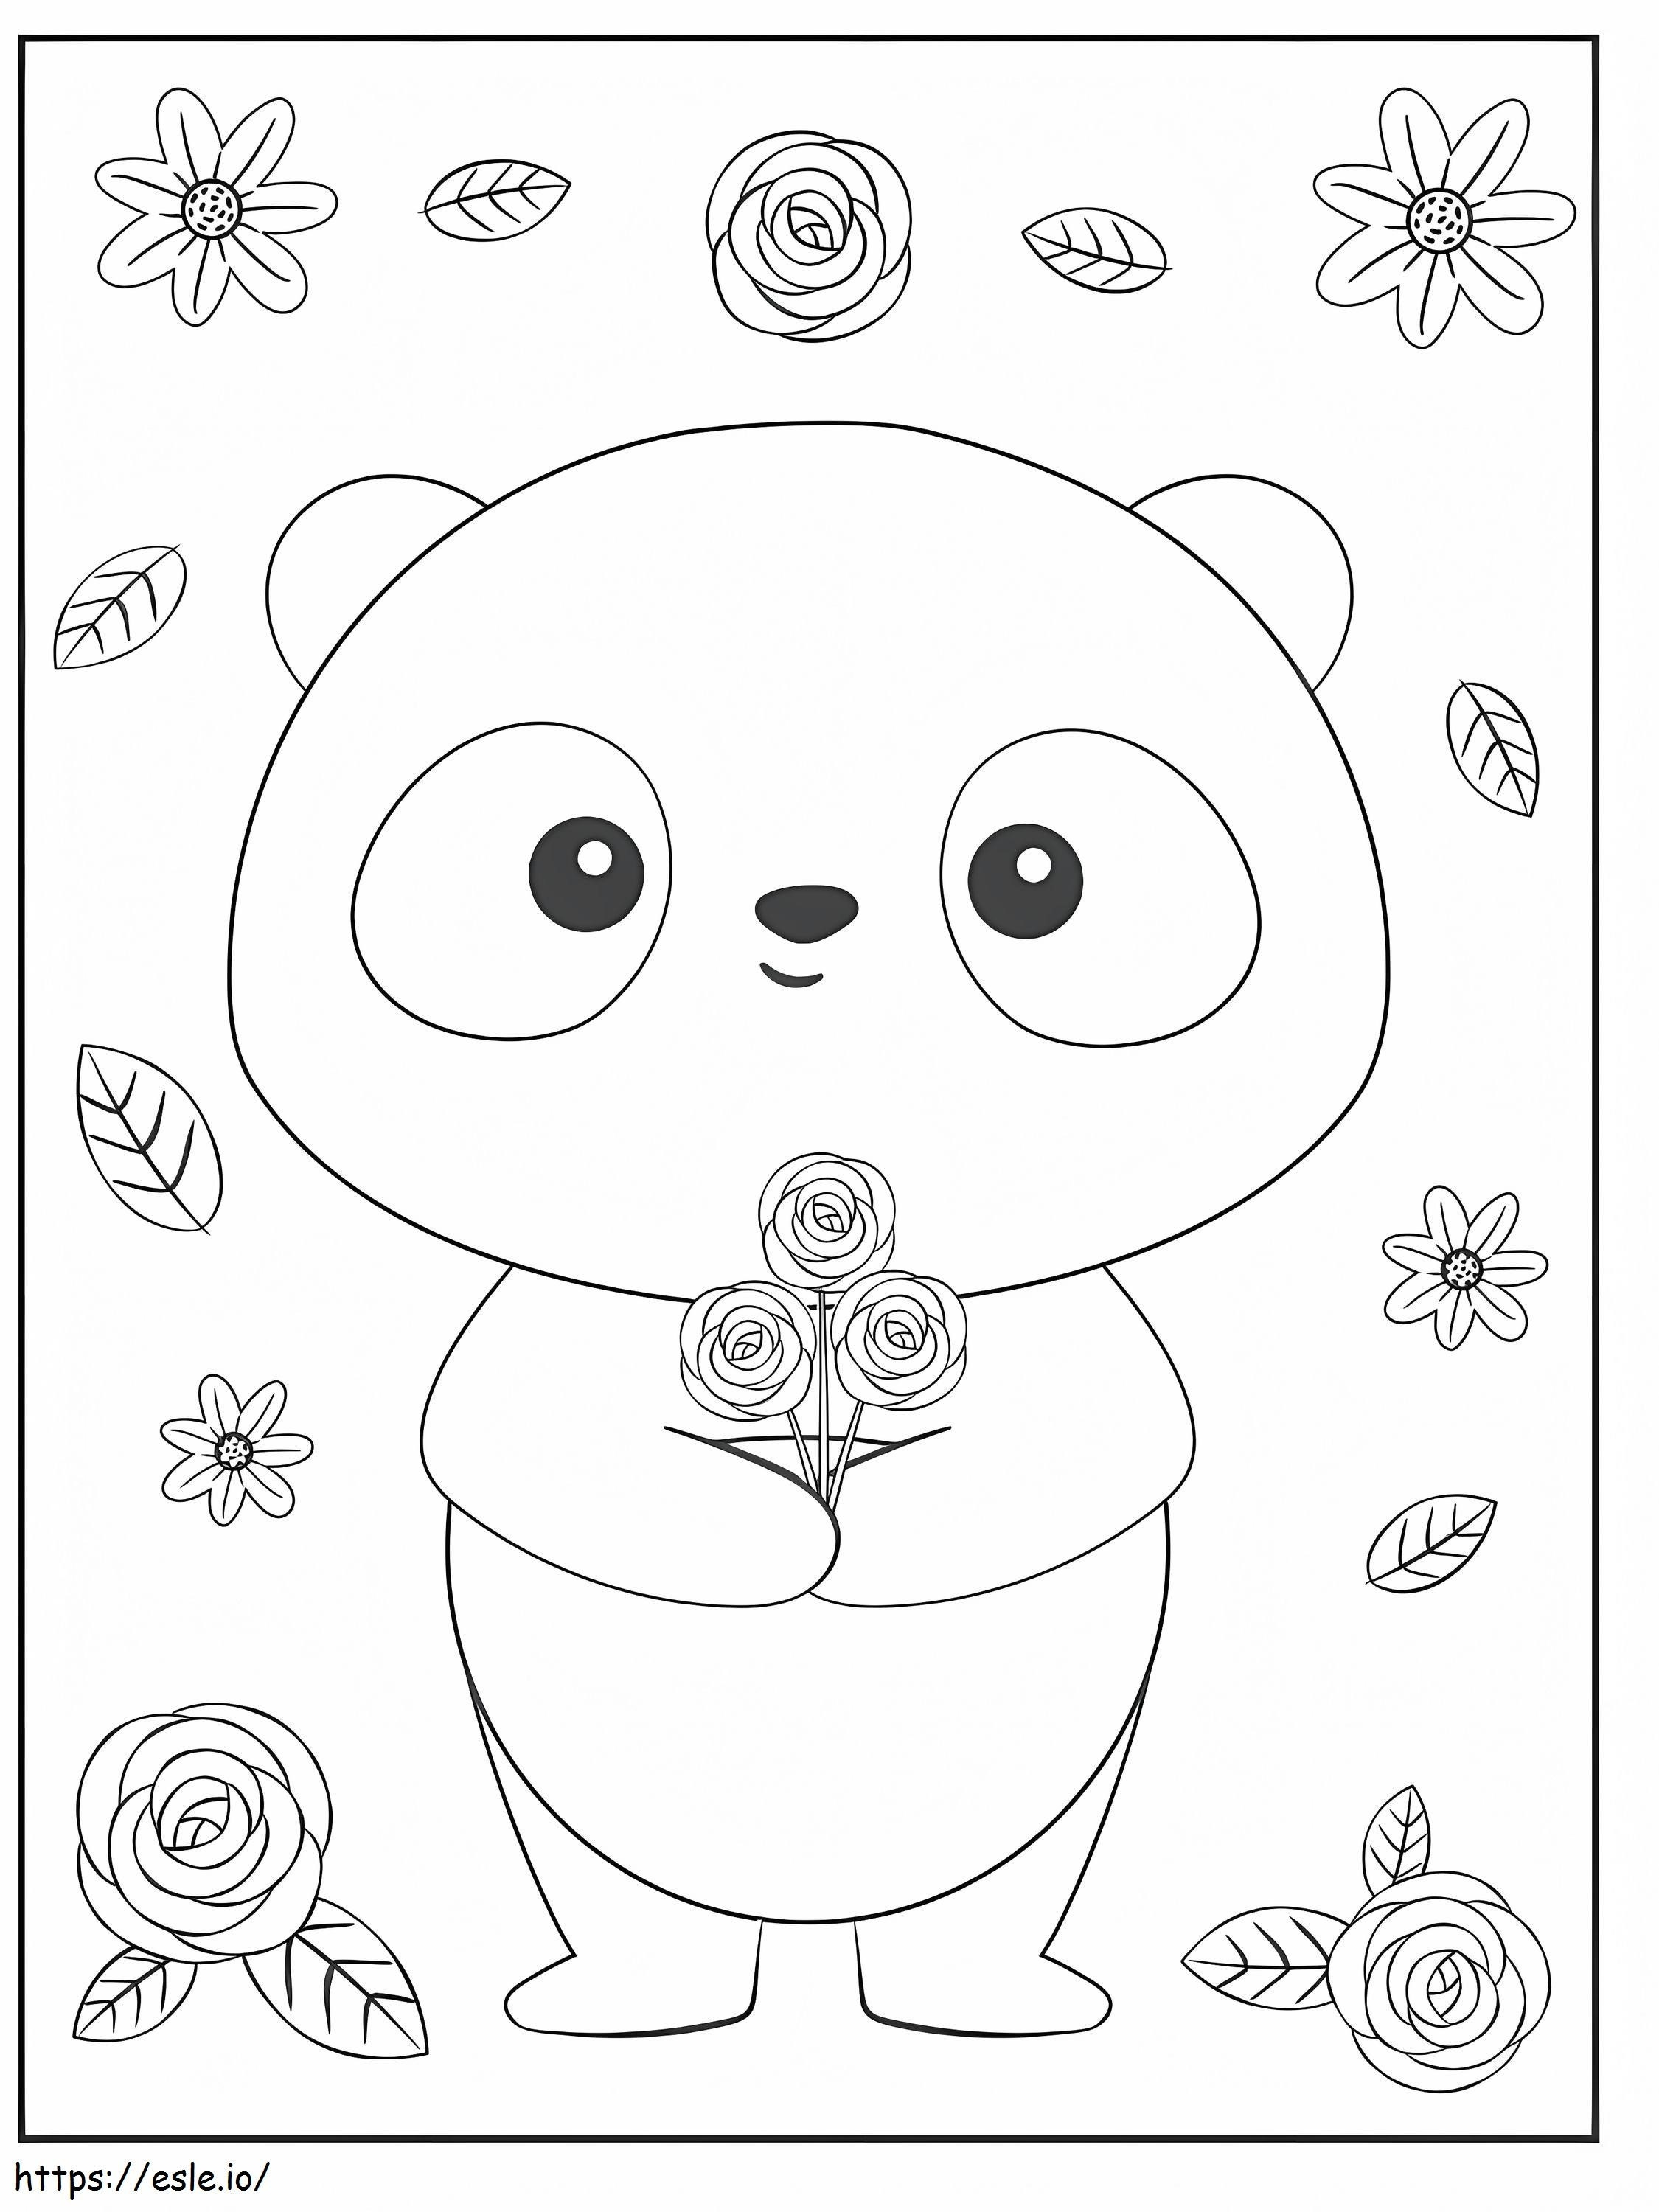 Panda With Flowers coloring page